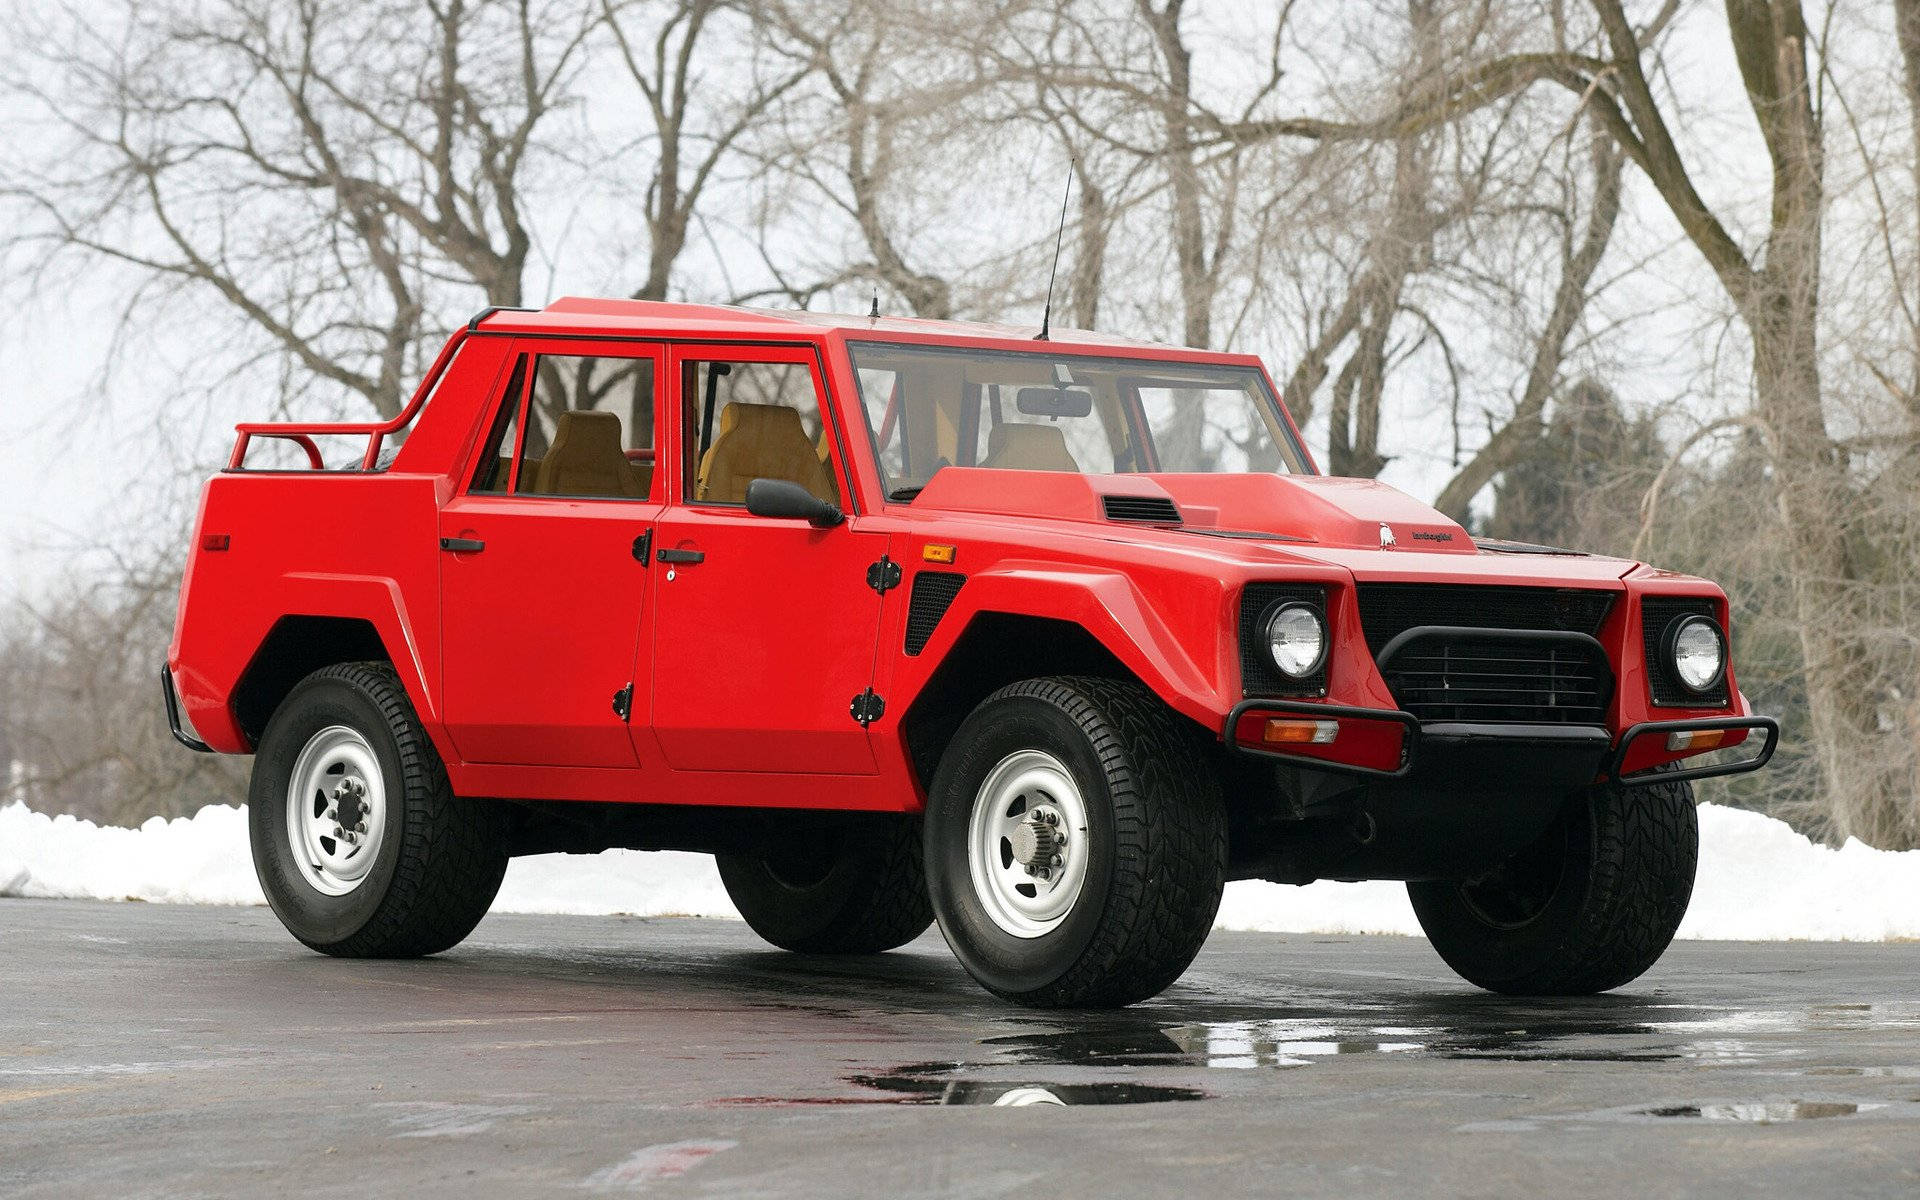 Red Lambo Truck At Snow Background